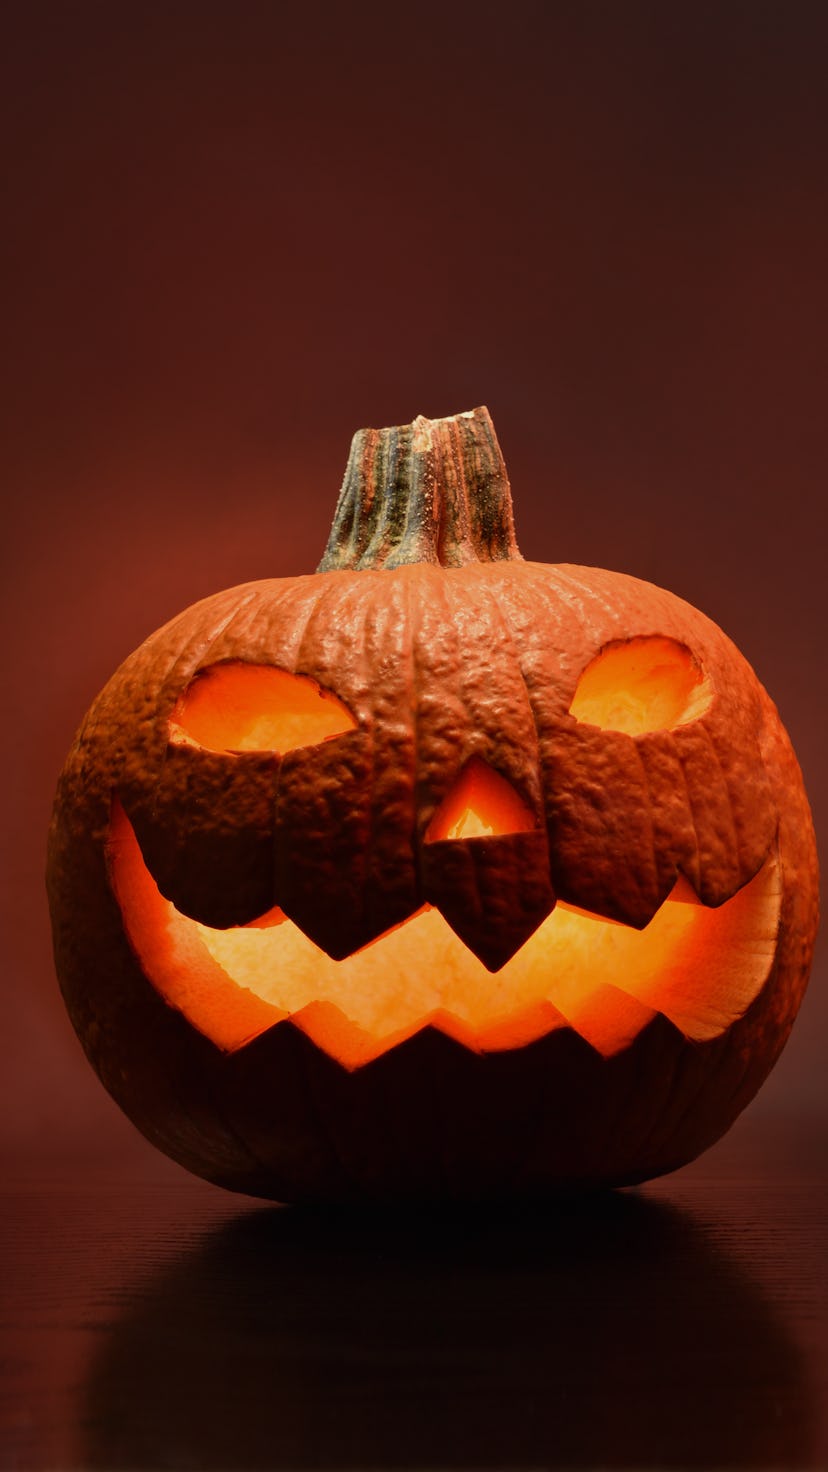 A carved jack-o'-lantern with spooky eyes and a candle inside, a classic jack-o'-lantern idea for 20...